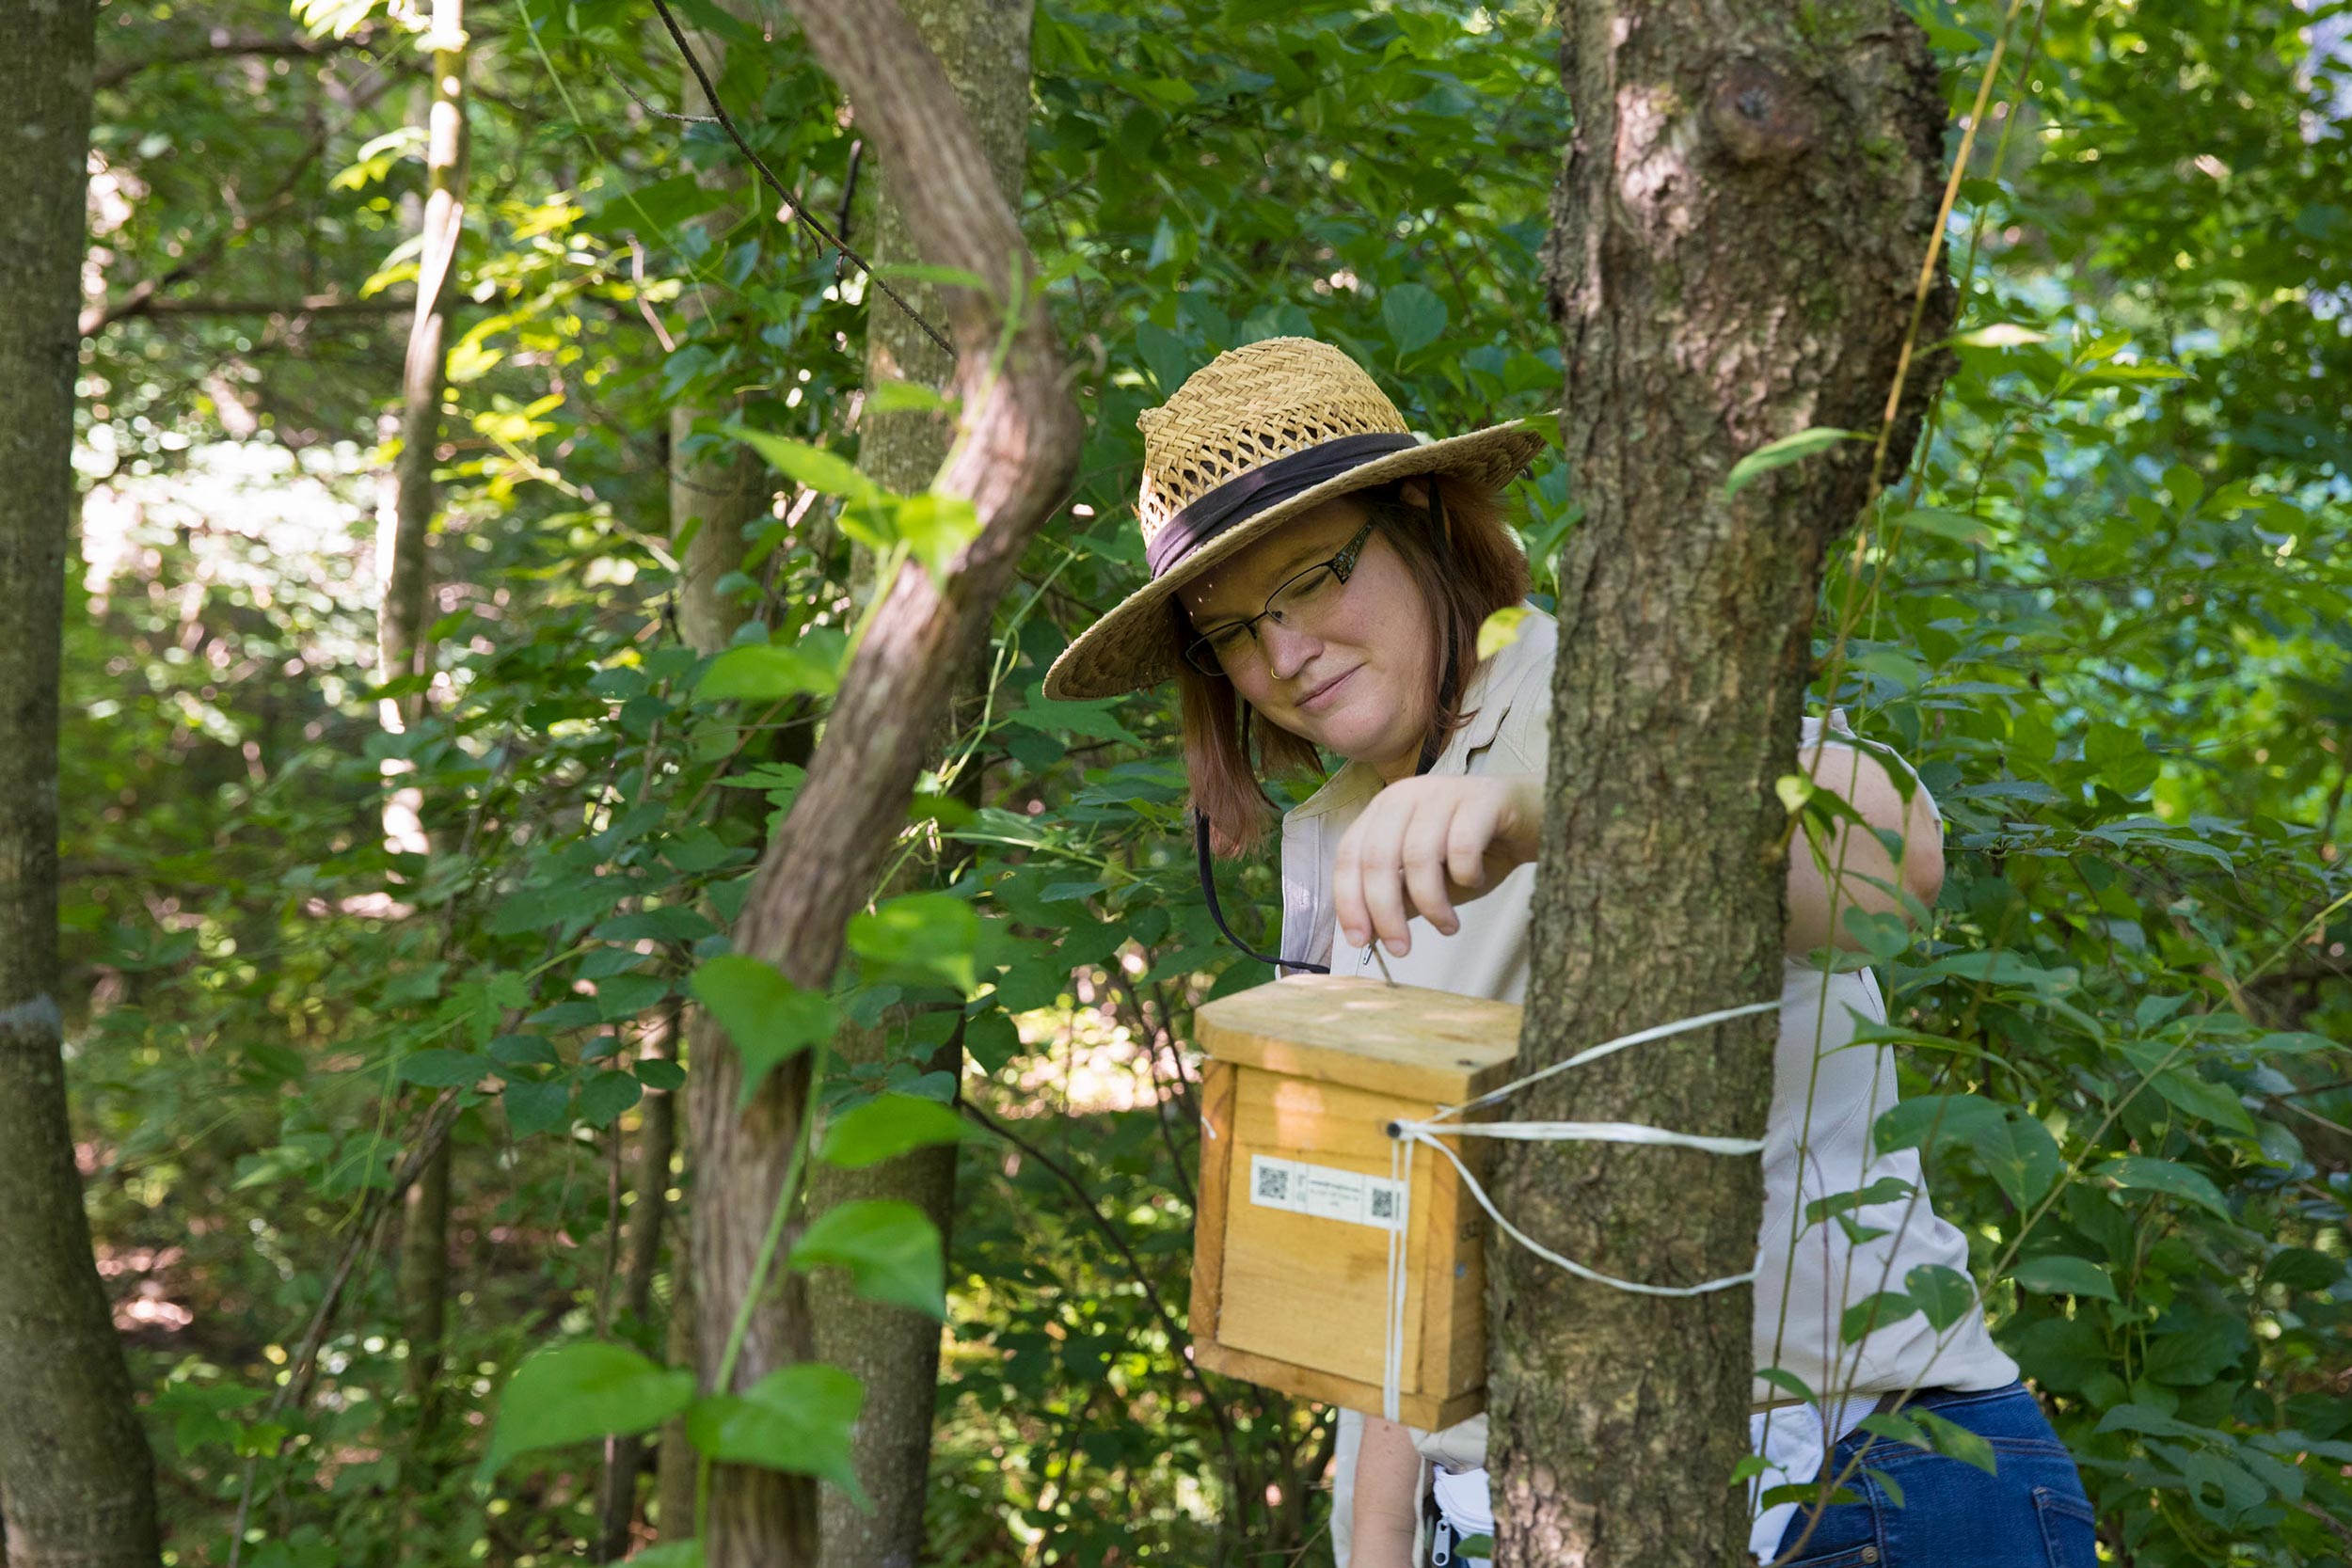 Amber Slatosky checking a bumblebee nesting box attached to a tree